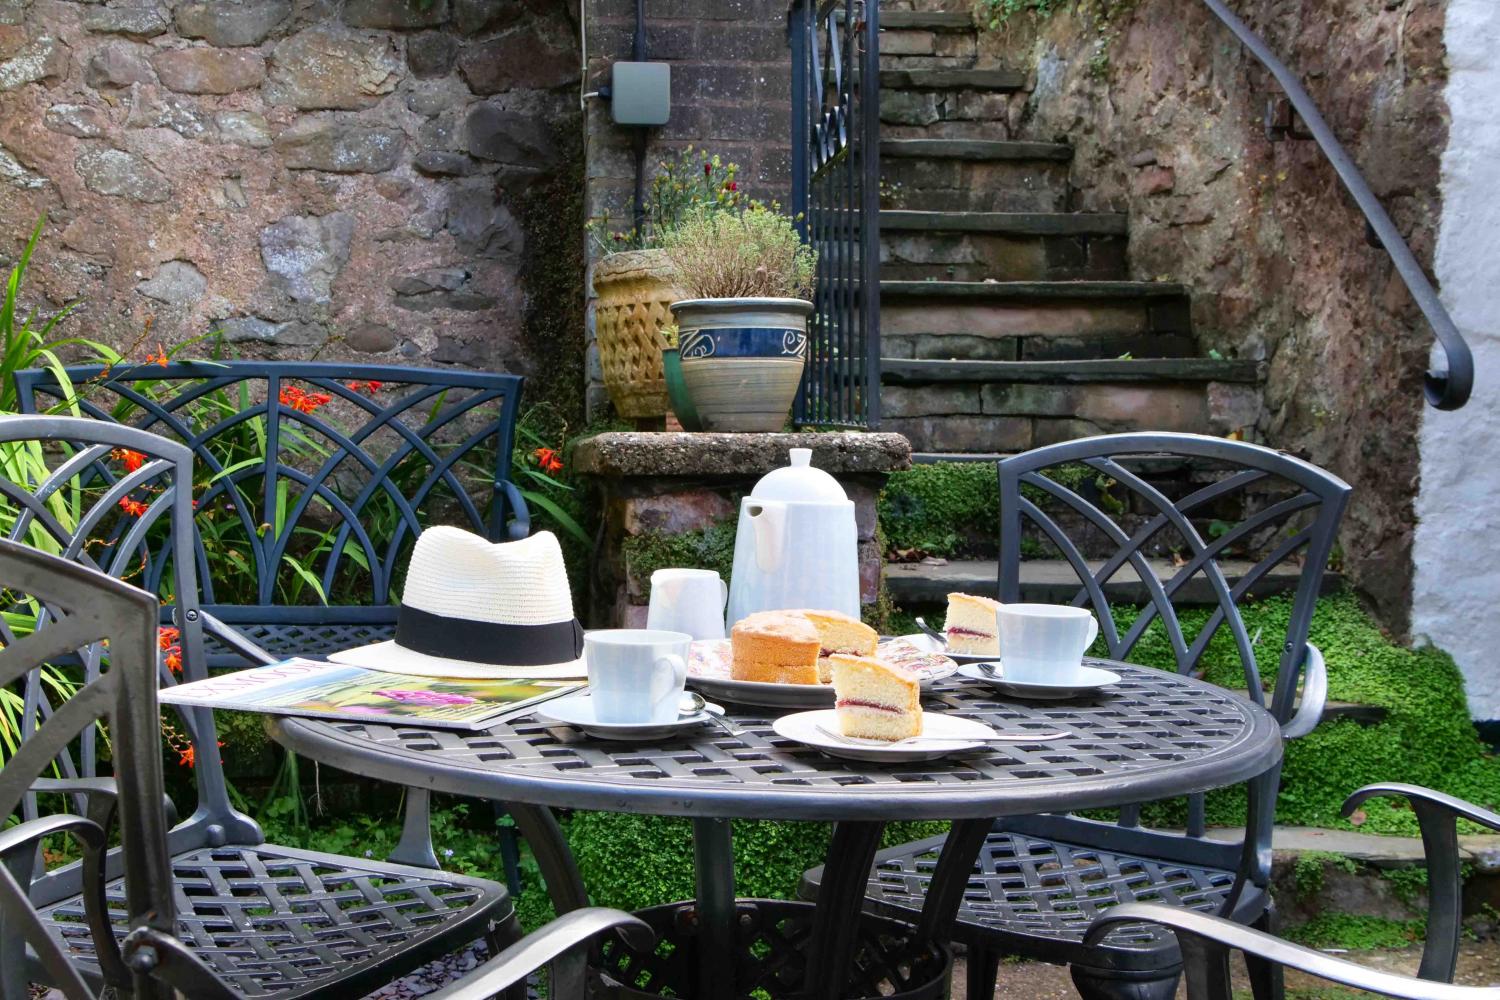 Afternoon tea on the courtyard.